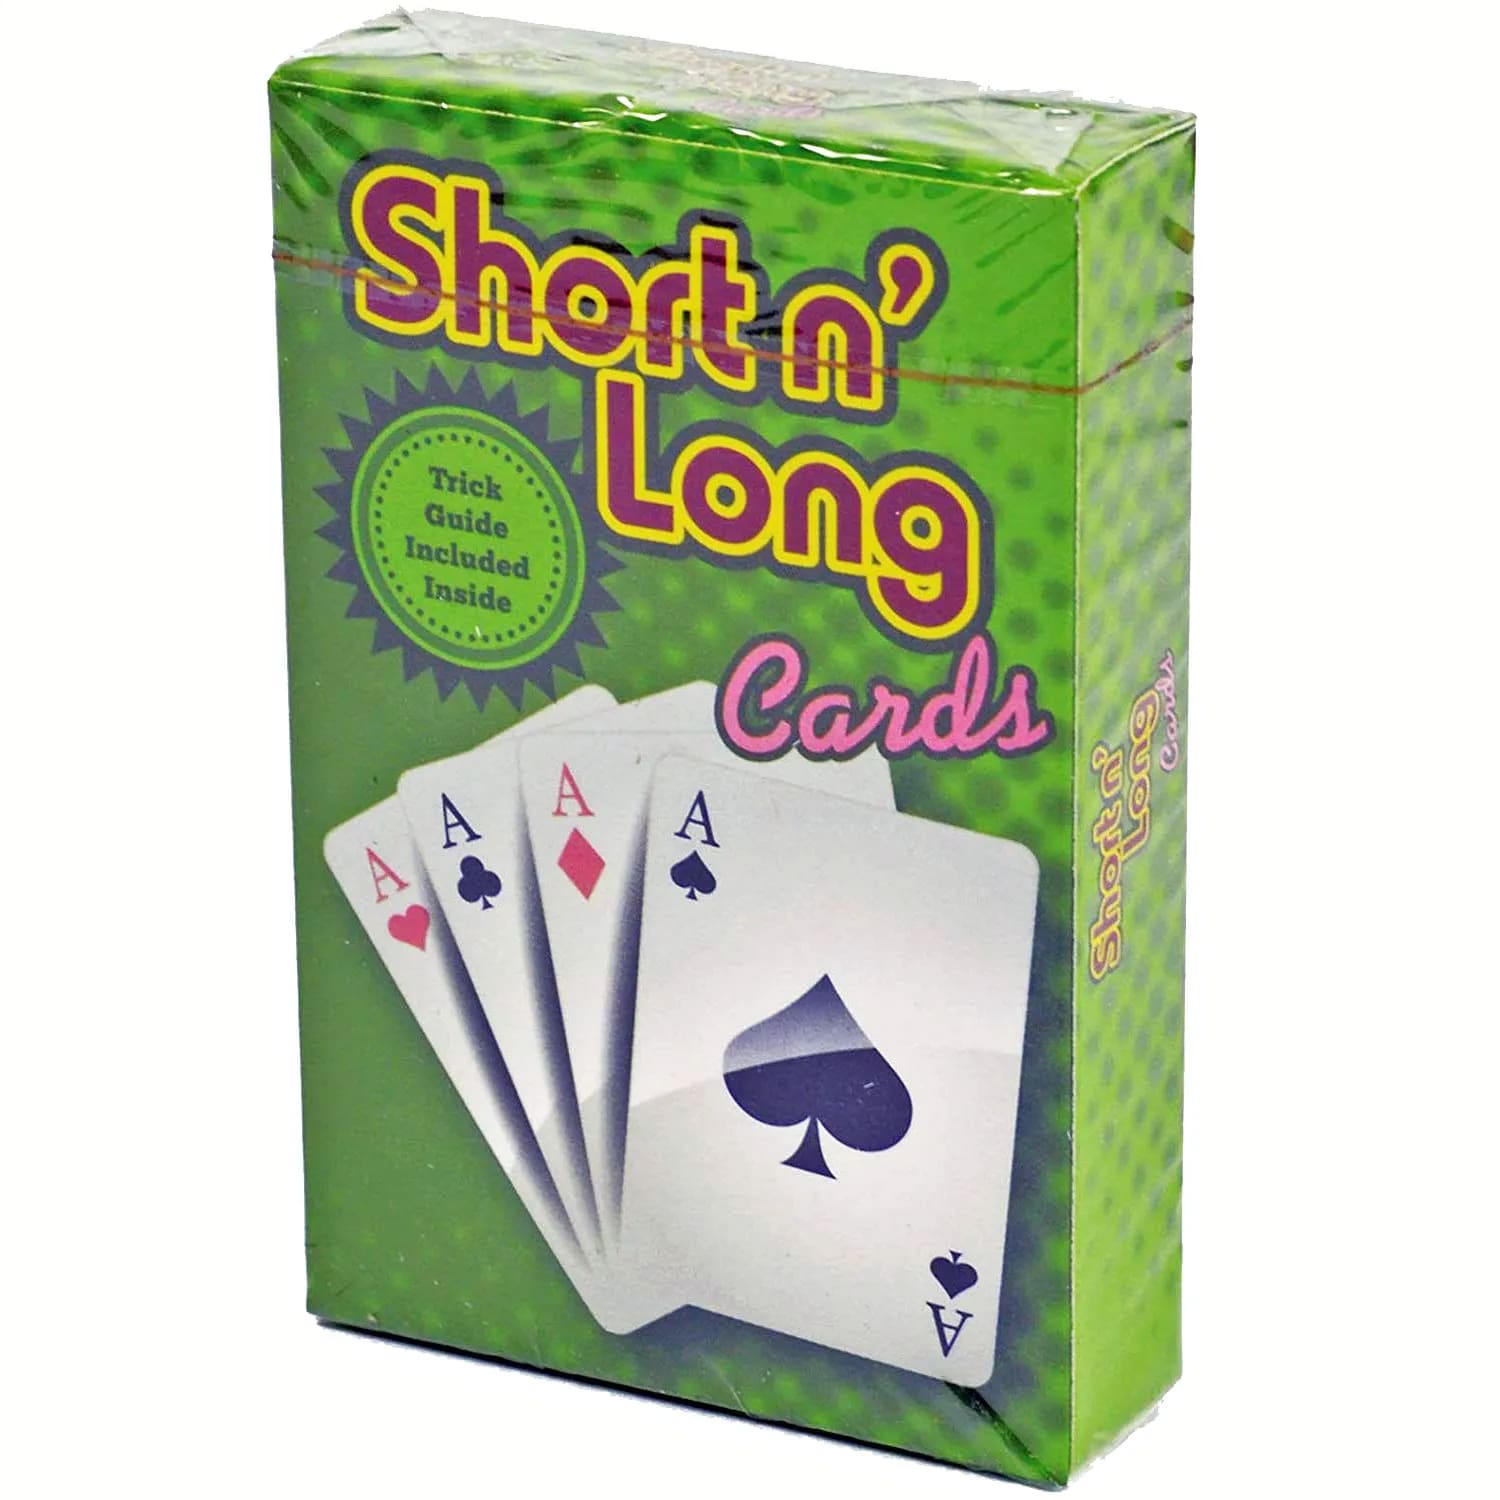 Short and Long Cards